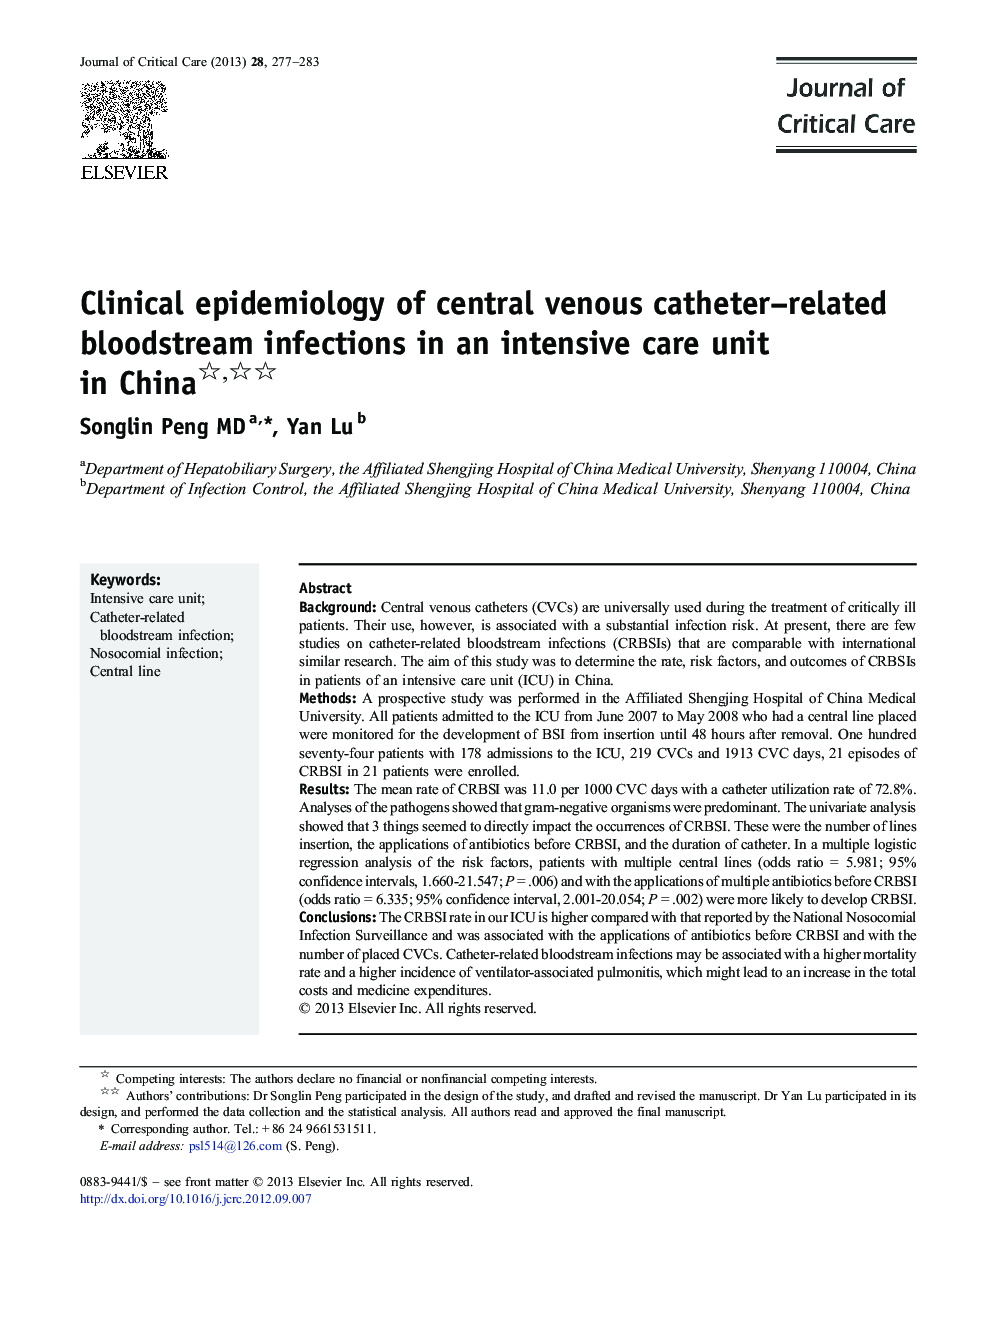 Clinical epidemiology of central venous catheter–related bloodstream infections in an intensive care unit in China 